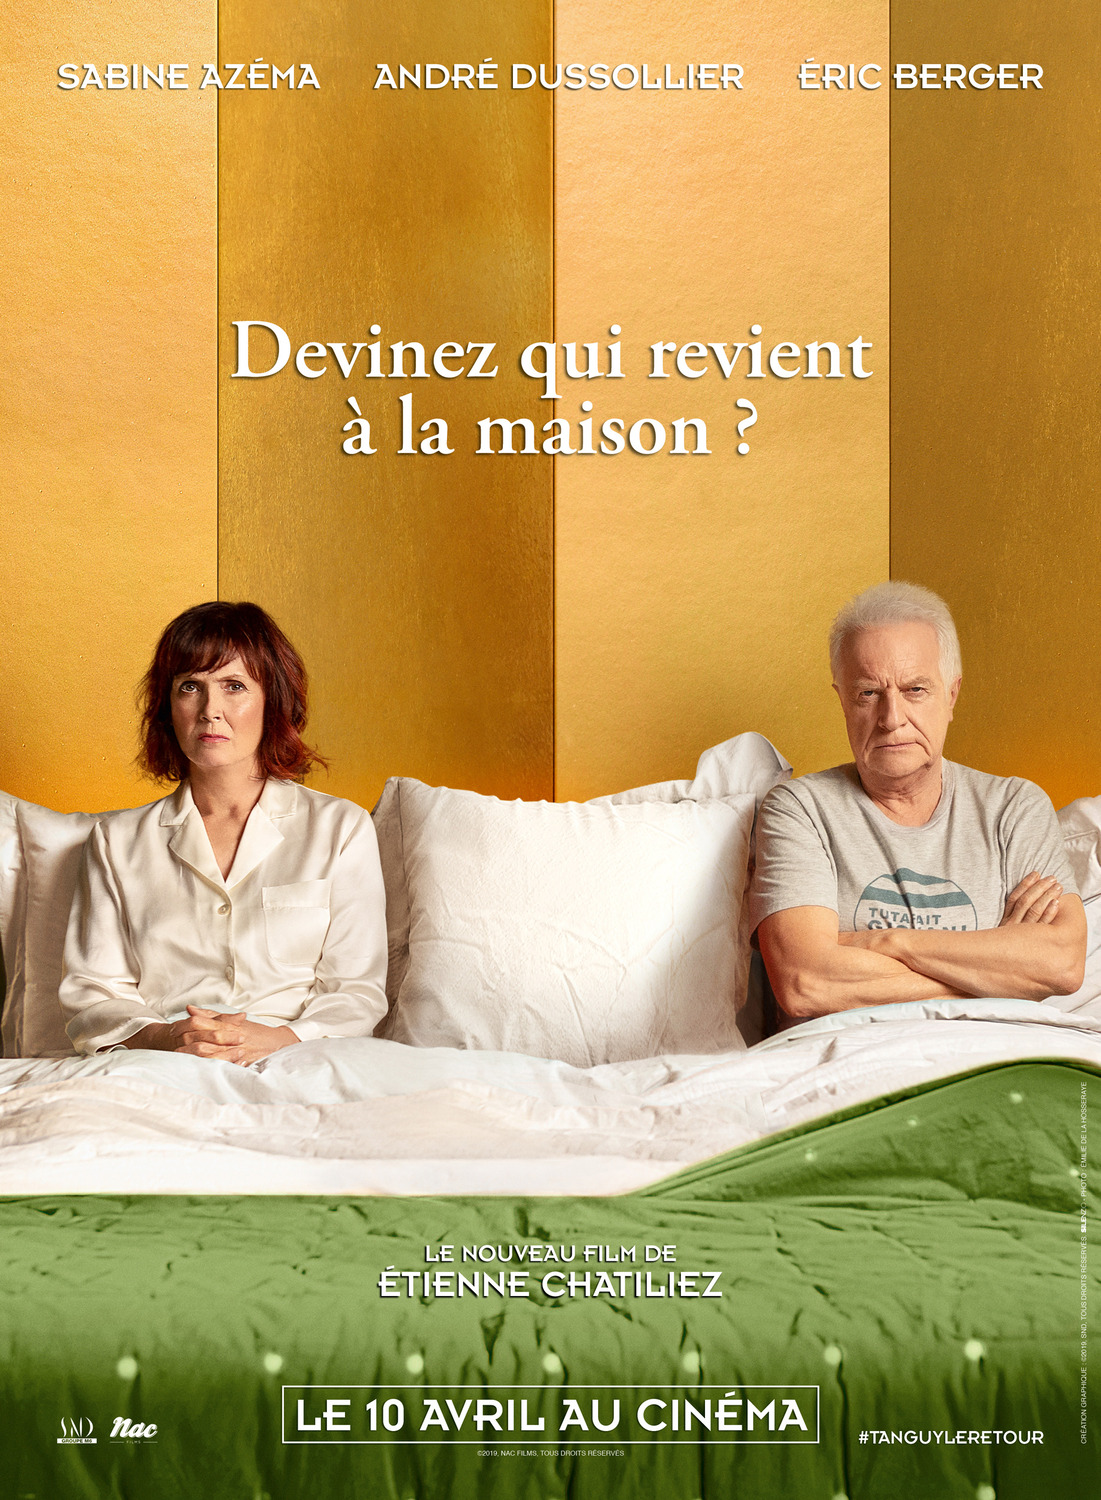 Extra Large Movie Poster Image for Tanguy, le retour (#1 of 2)